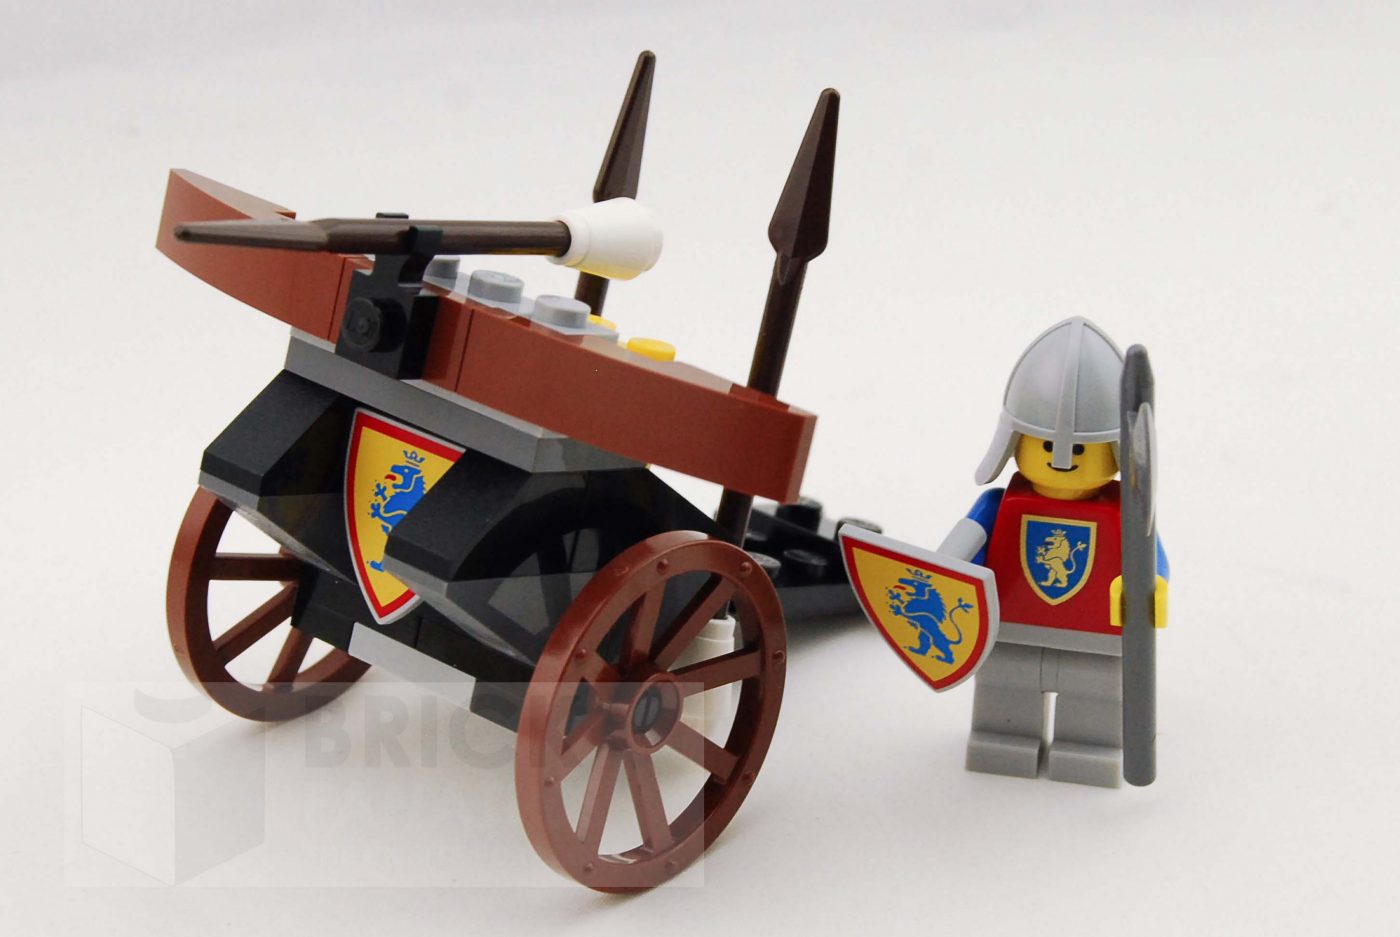 REVIEW LEGO 5004419 Classic Knights - HelloBricks